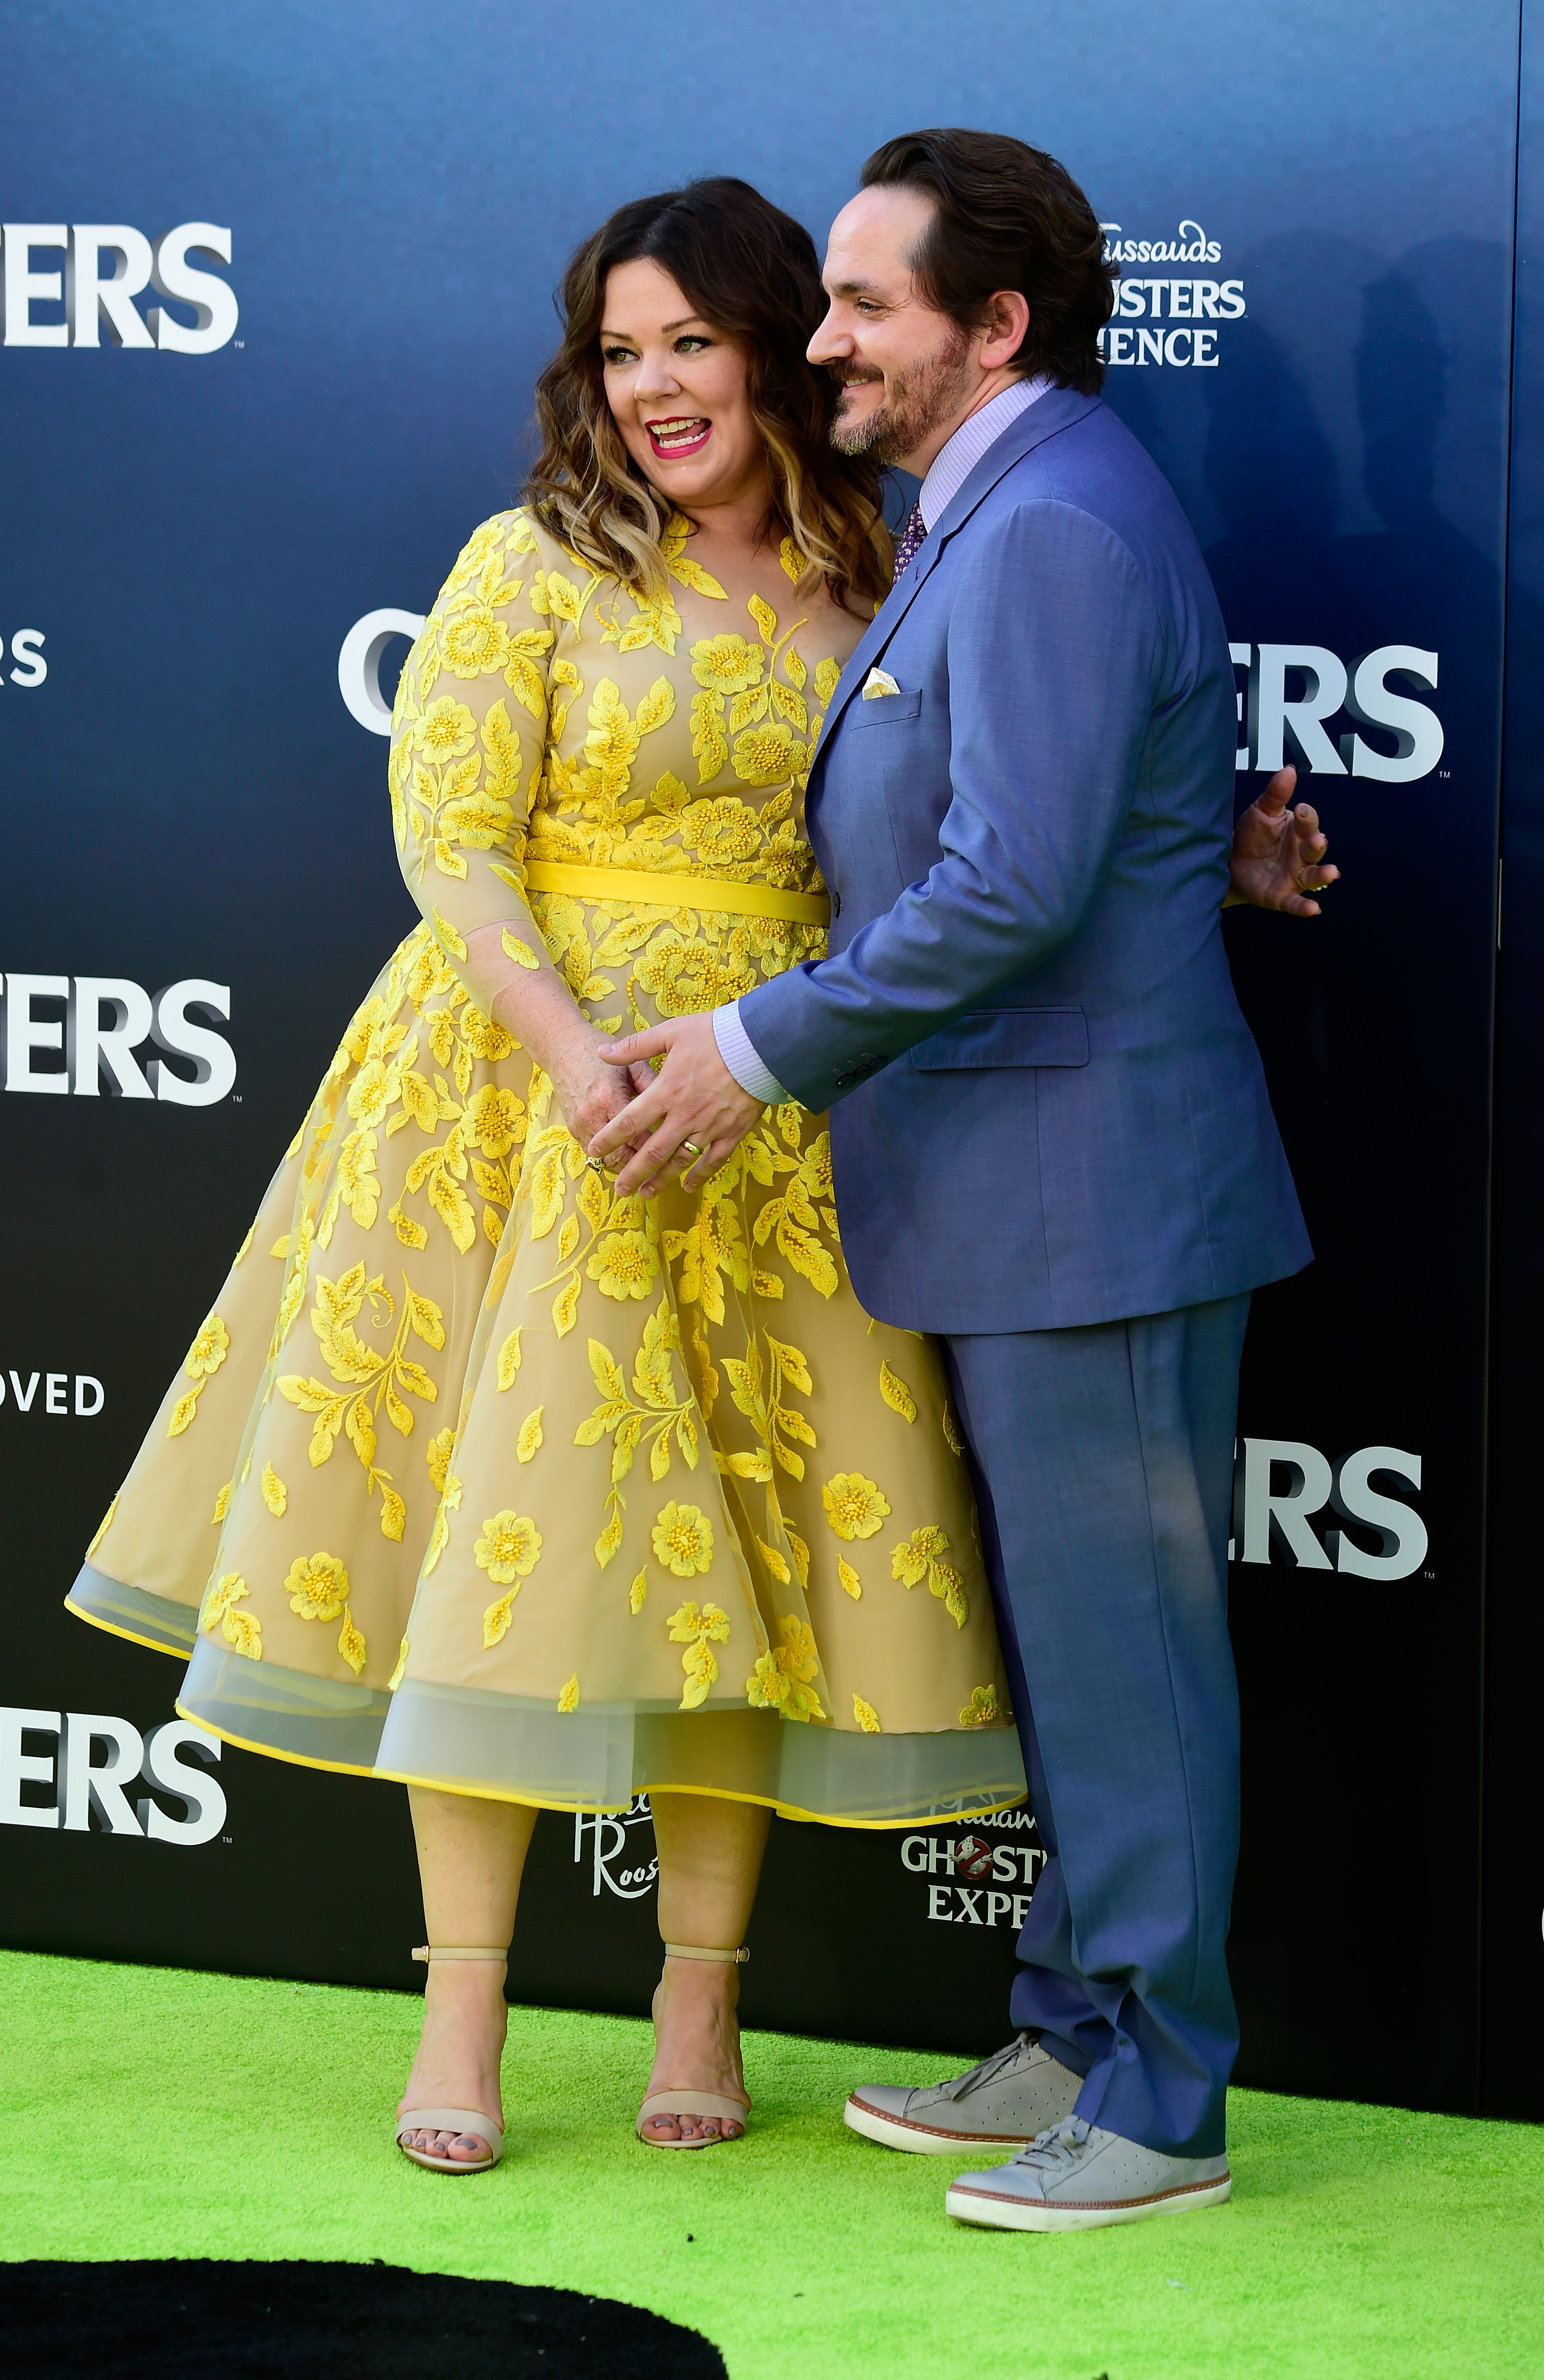 Melissa McCarthy and Ben Falcone at the premiere of "Ghostbusters" in Hollywood, California on July 9, 2016 | Source: Getty Images